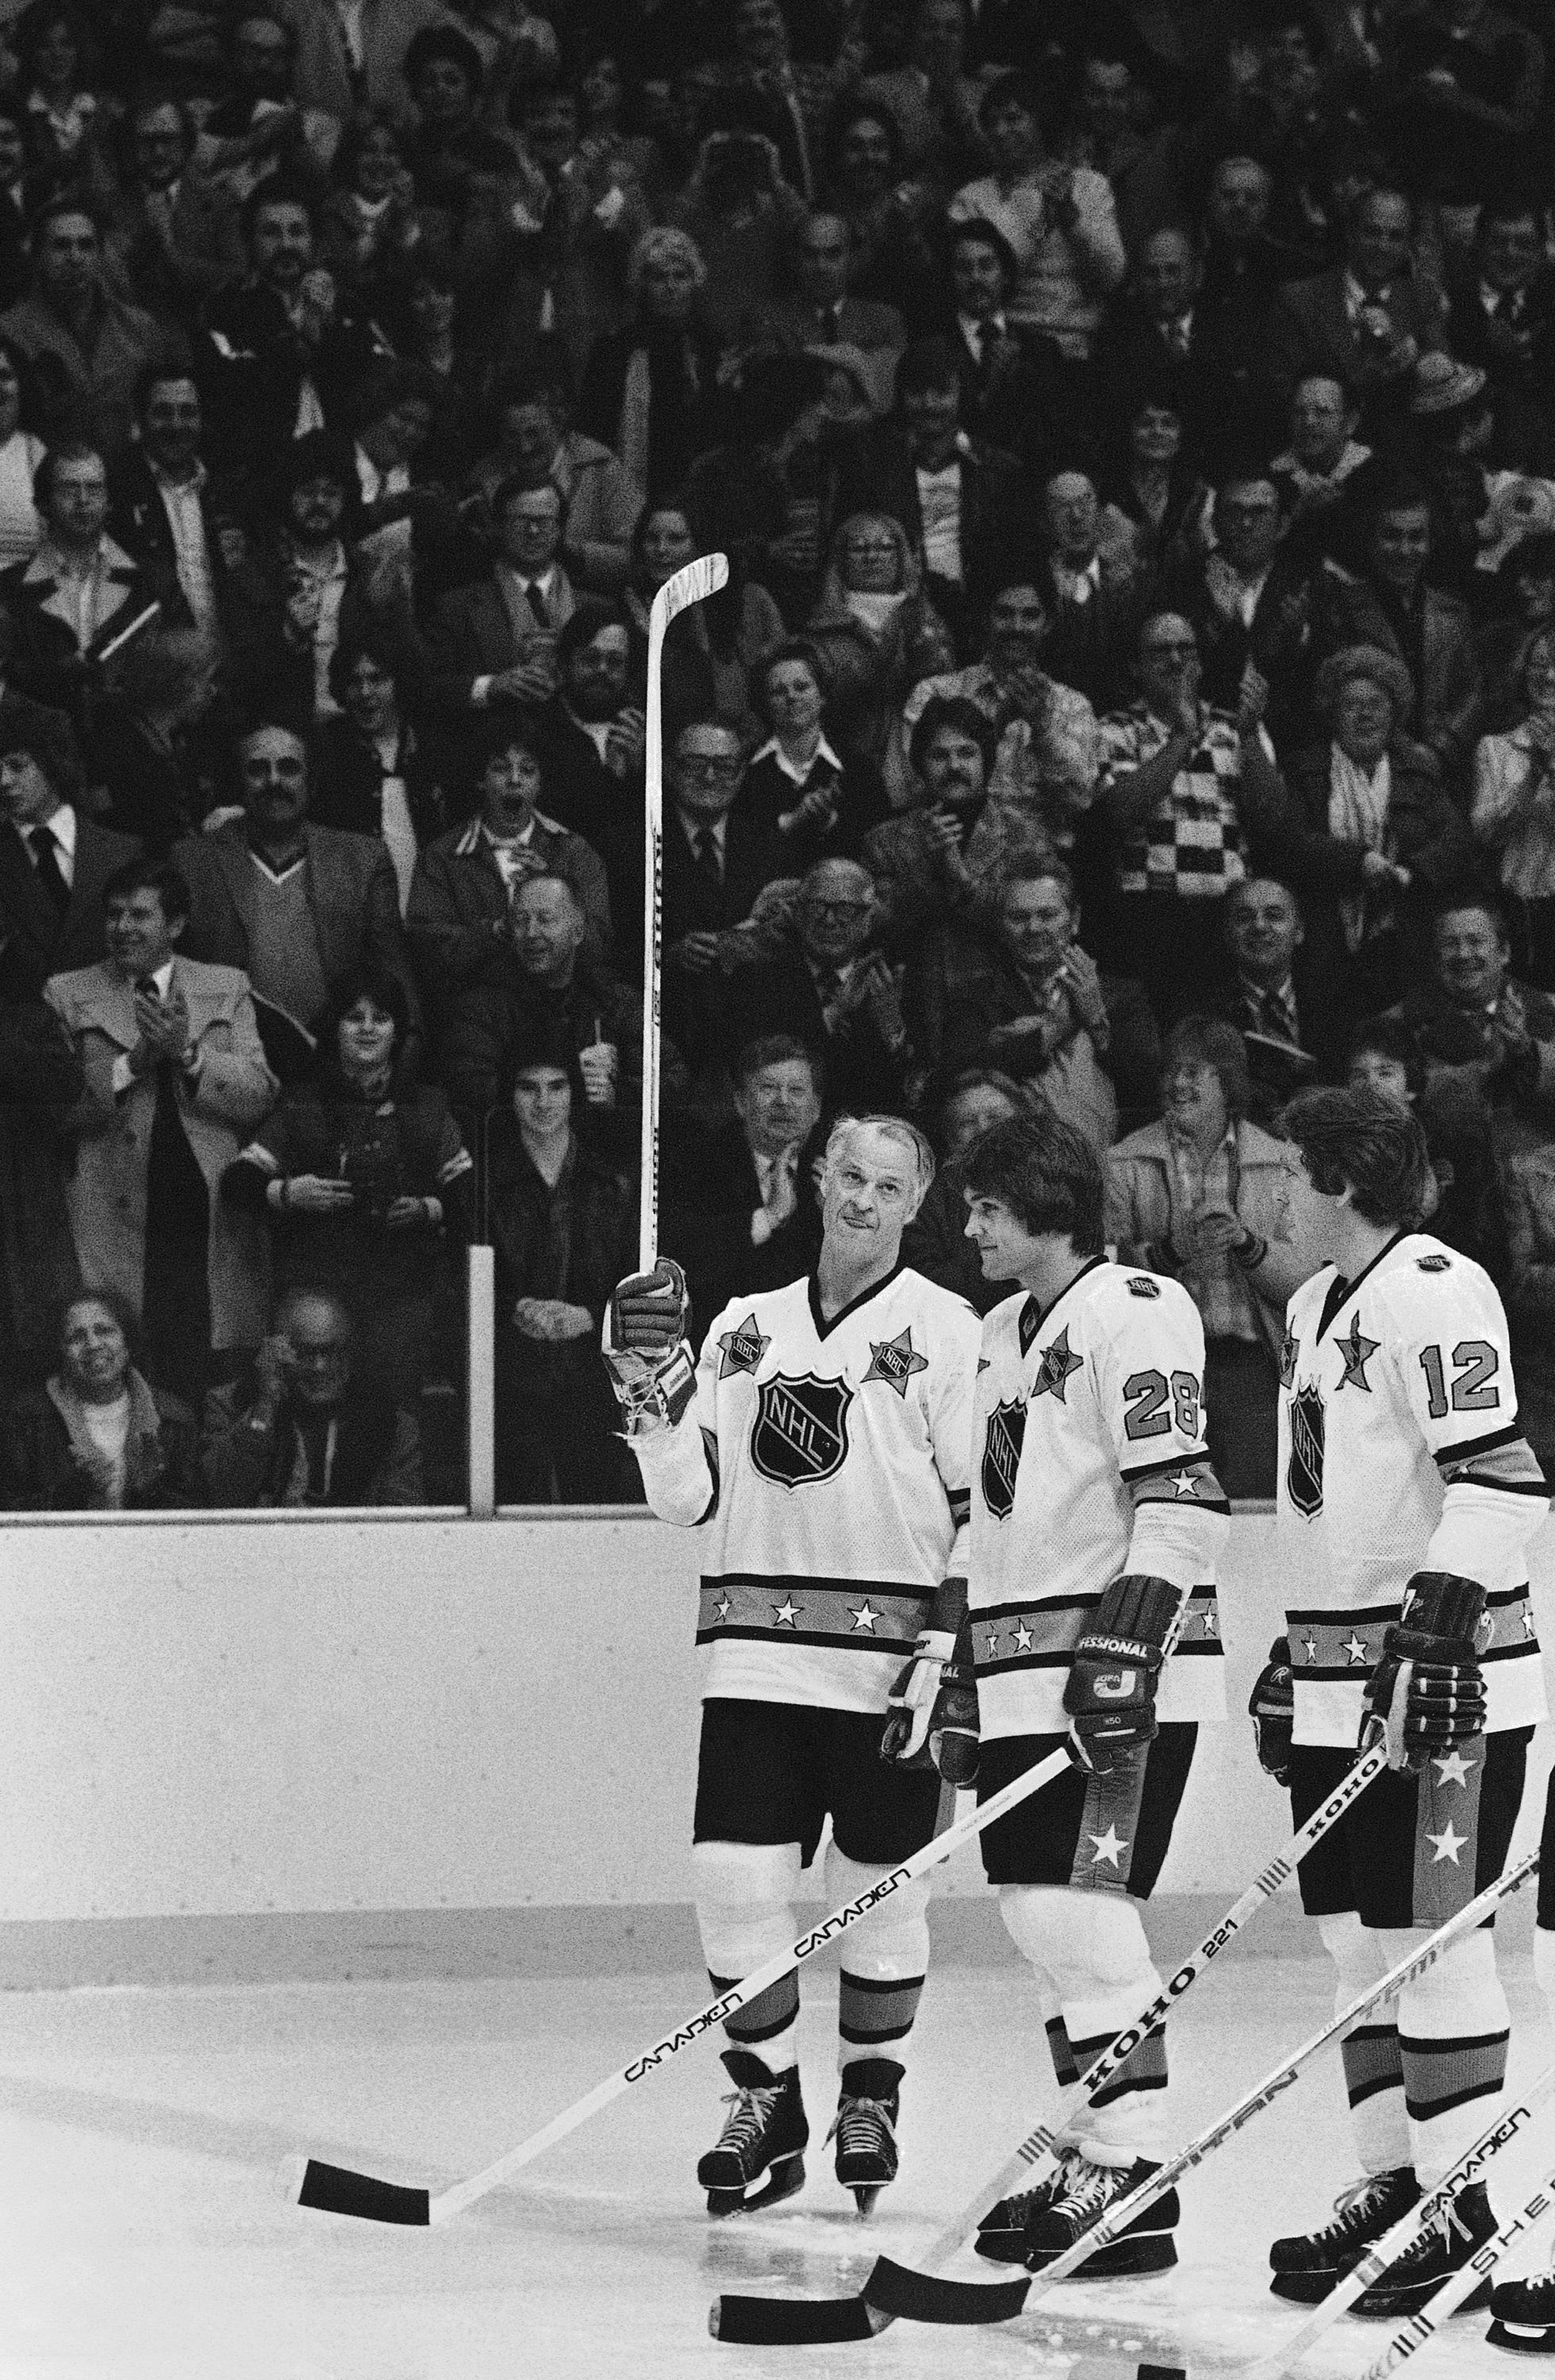 The most iconic photos of the Joe Louis Arena farewell